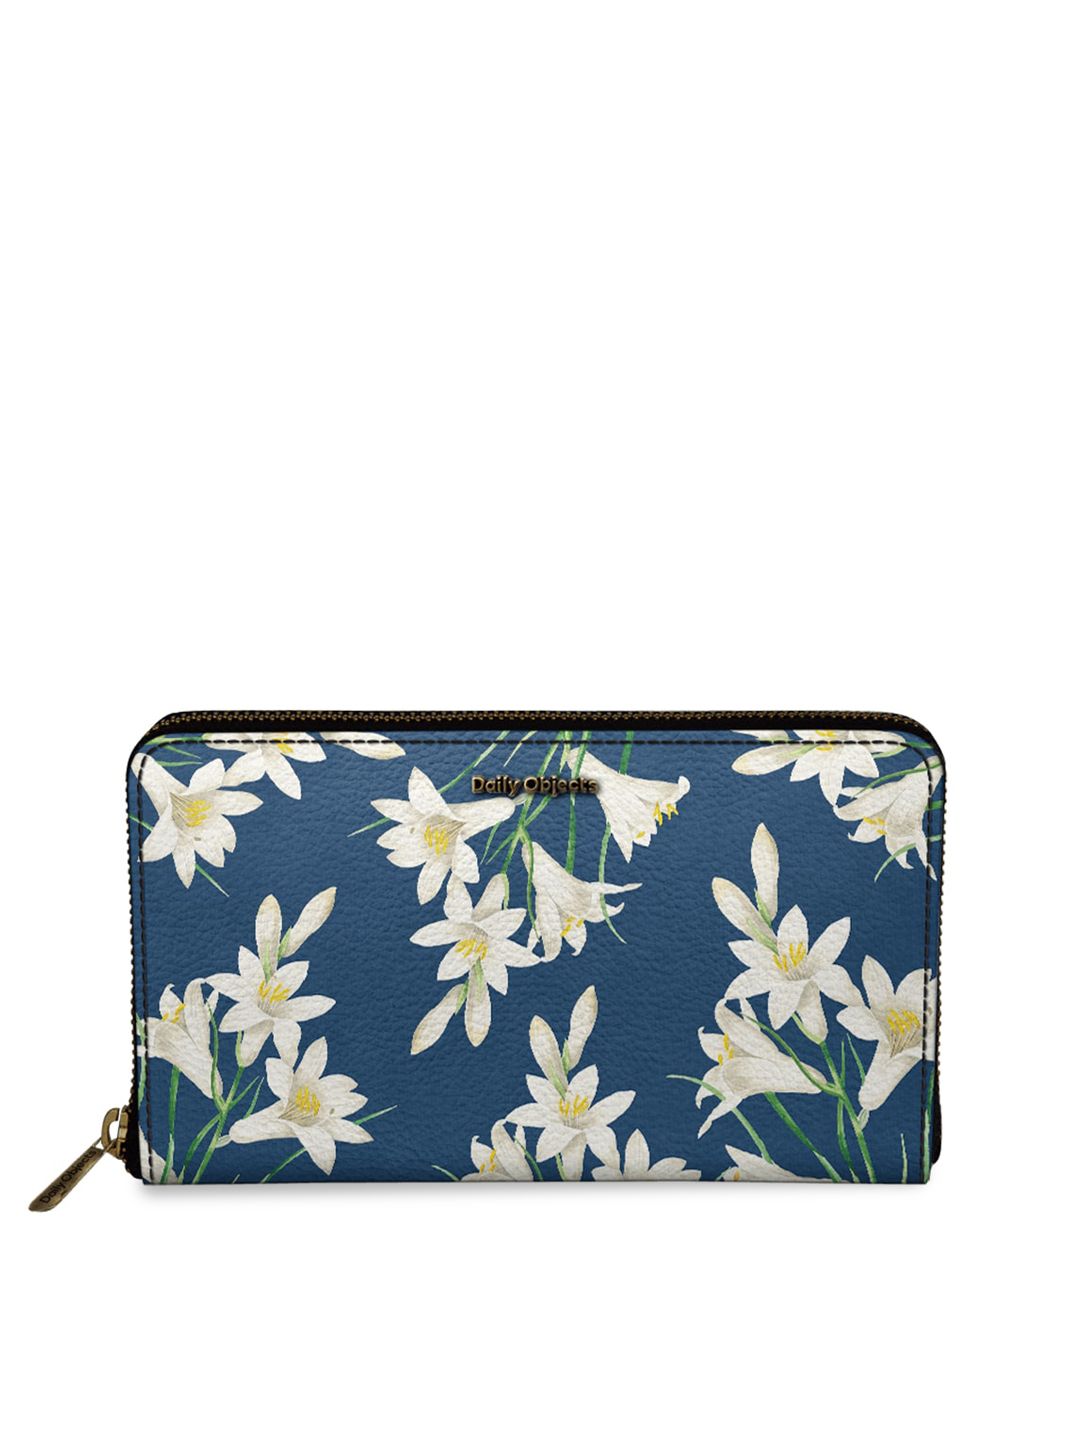 DailyObjects Women Blue & White Printed Zip Around Wallet Price in India